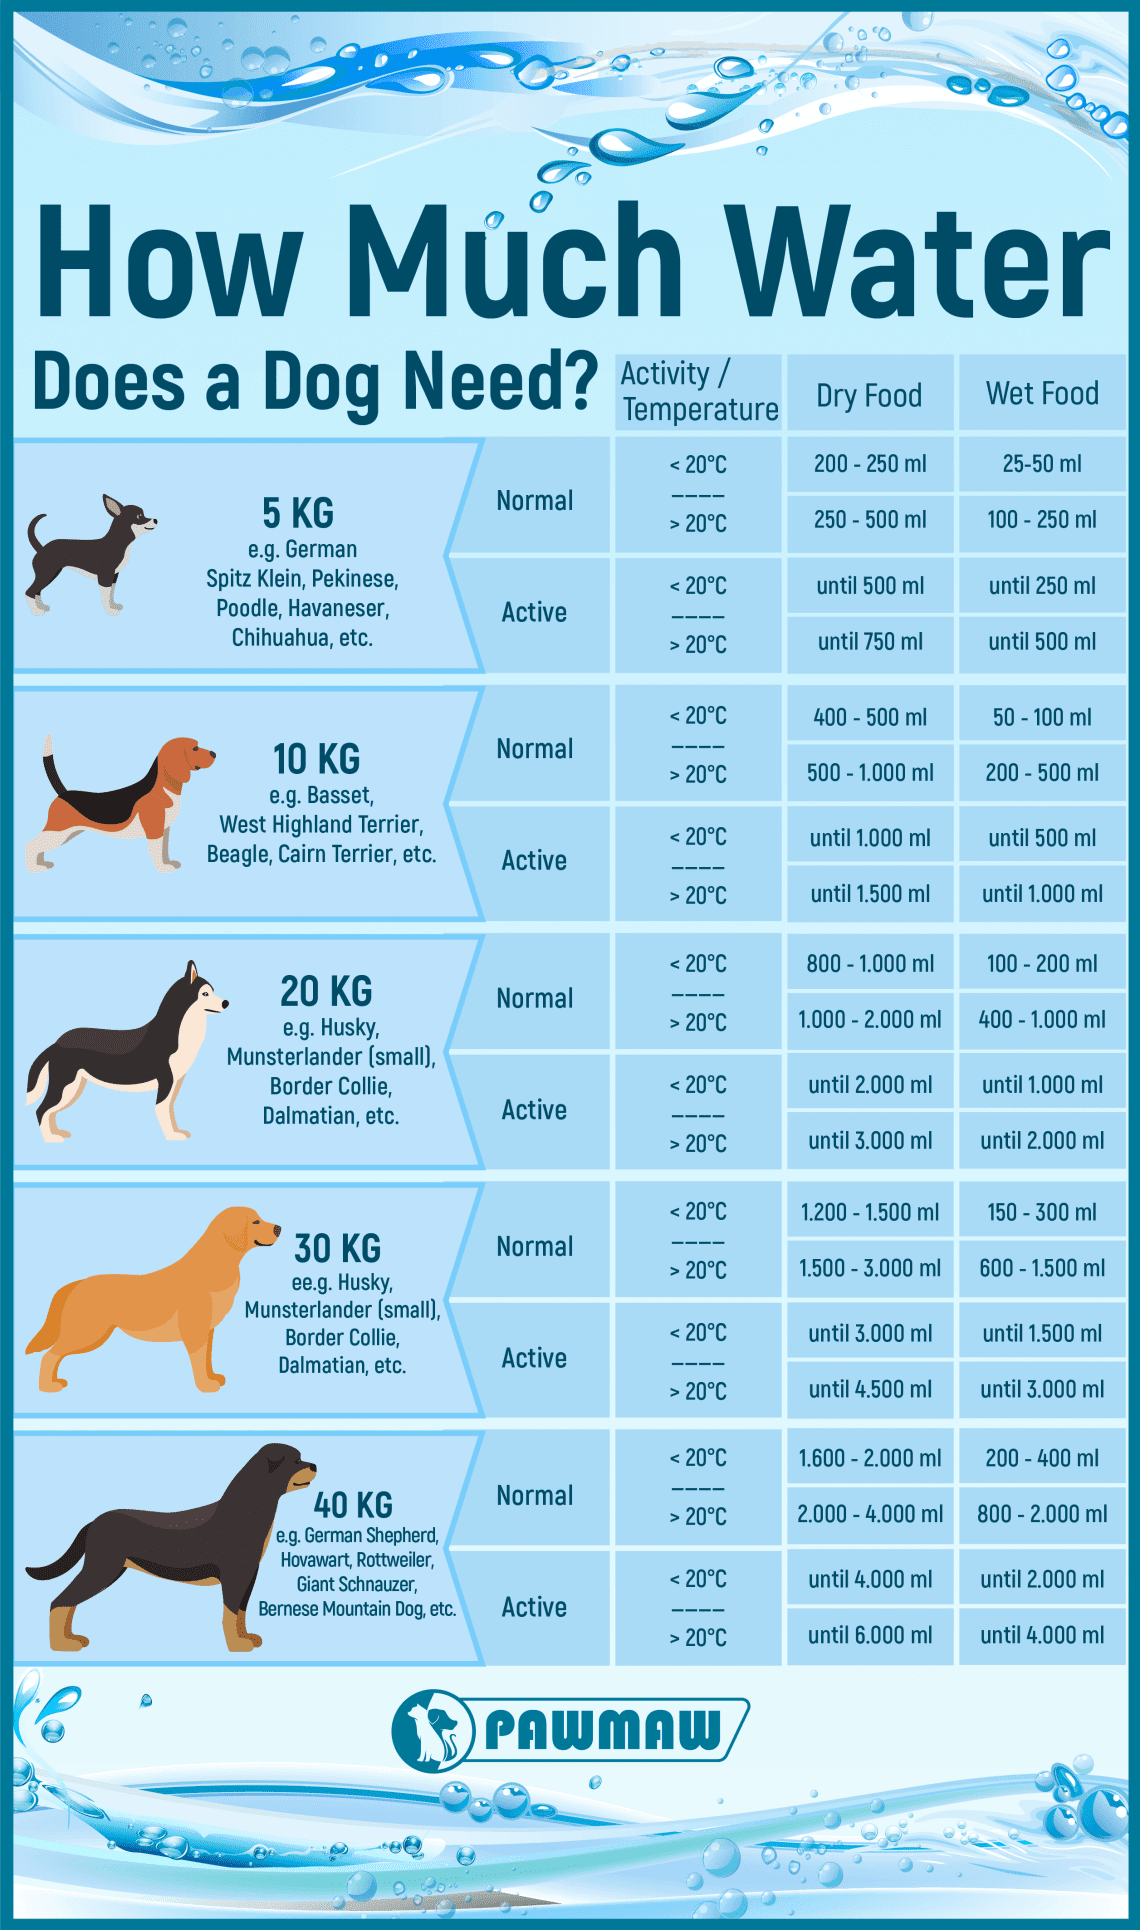 How much water should a dog drink per day?